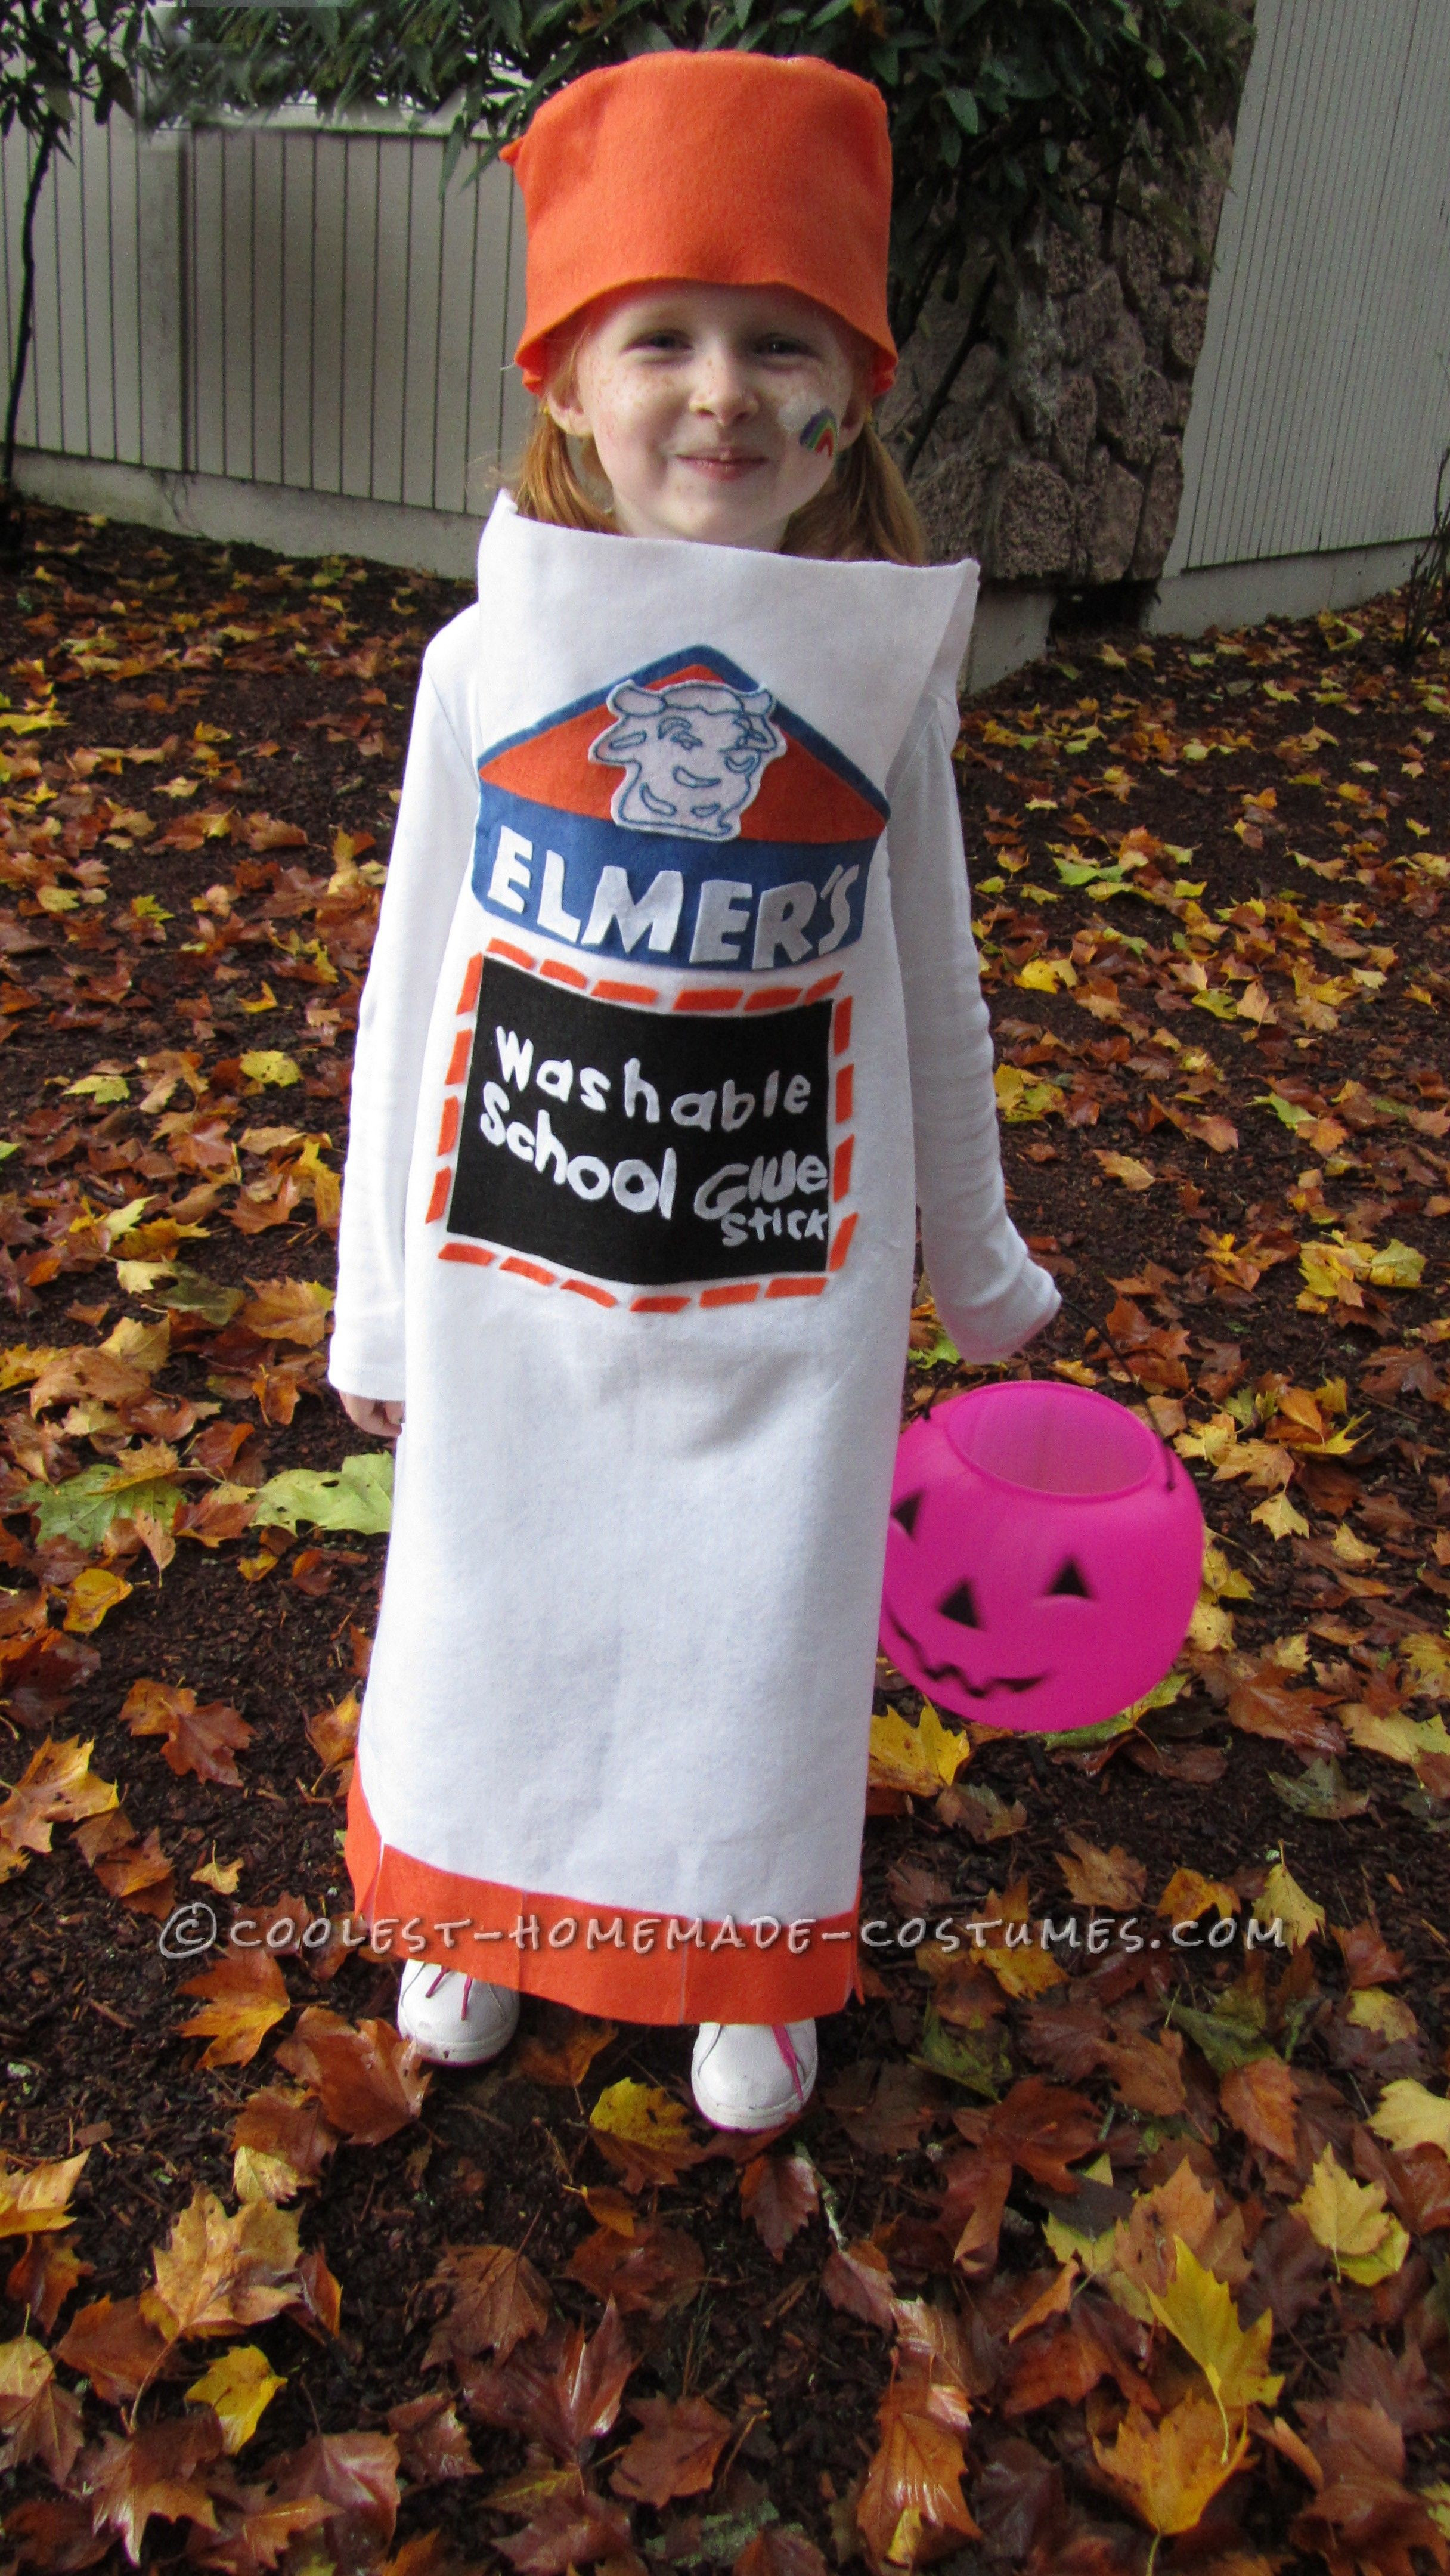 Cool DIY Costumes
 Cool Homemade Elmer’s Glue Stick Costume for a Girl